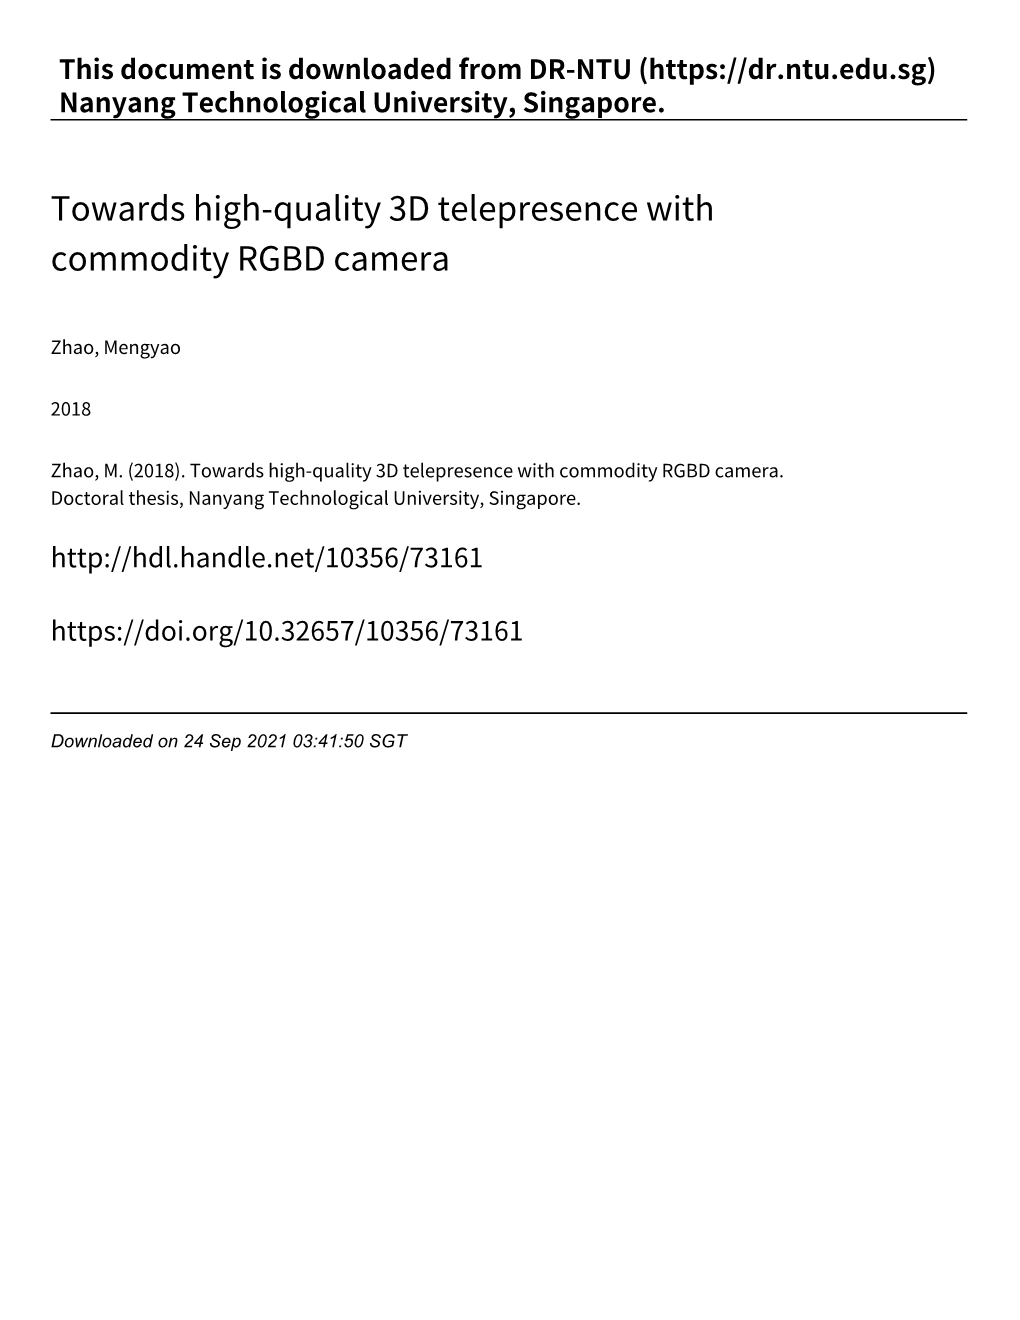 Towards High‑Quality 3D Telepresence with Commodity RGBD Camera